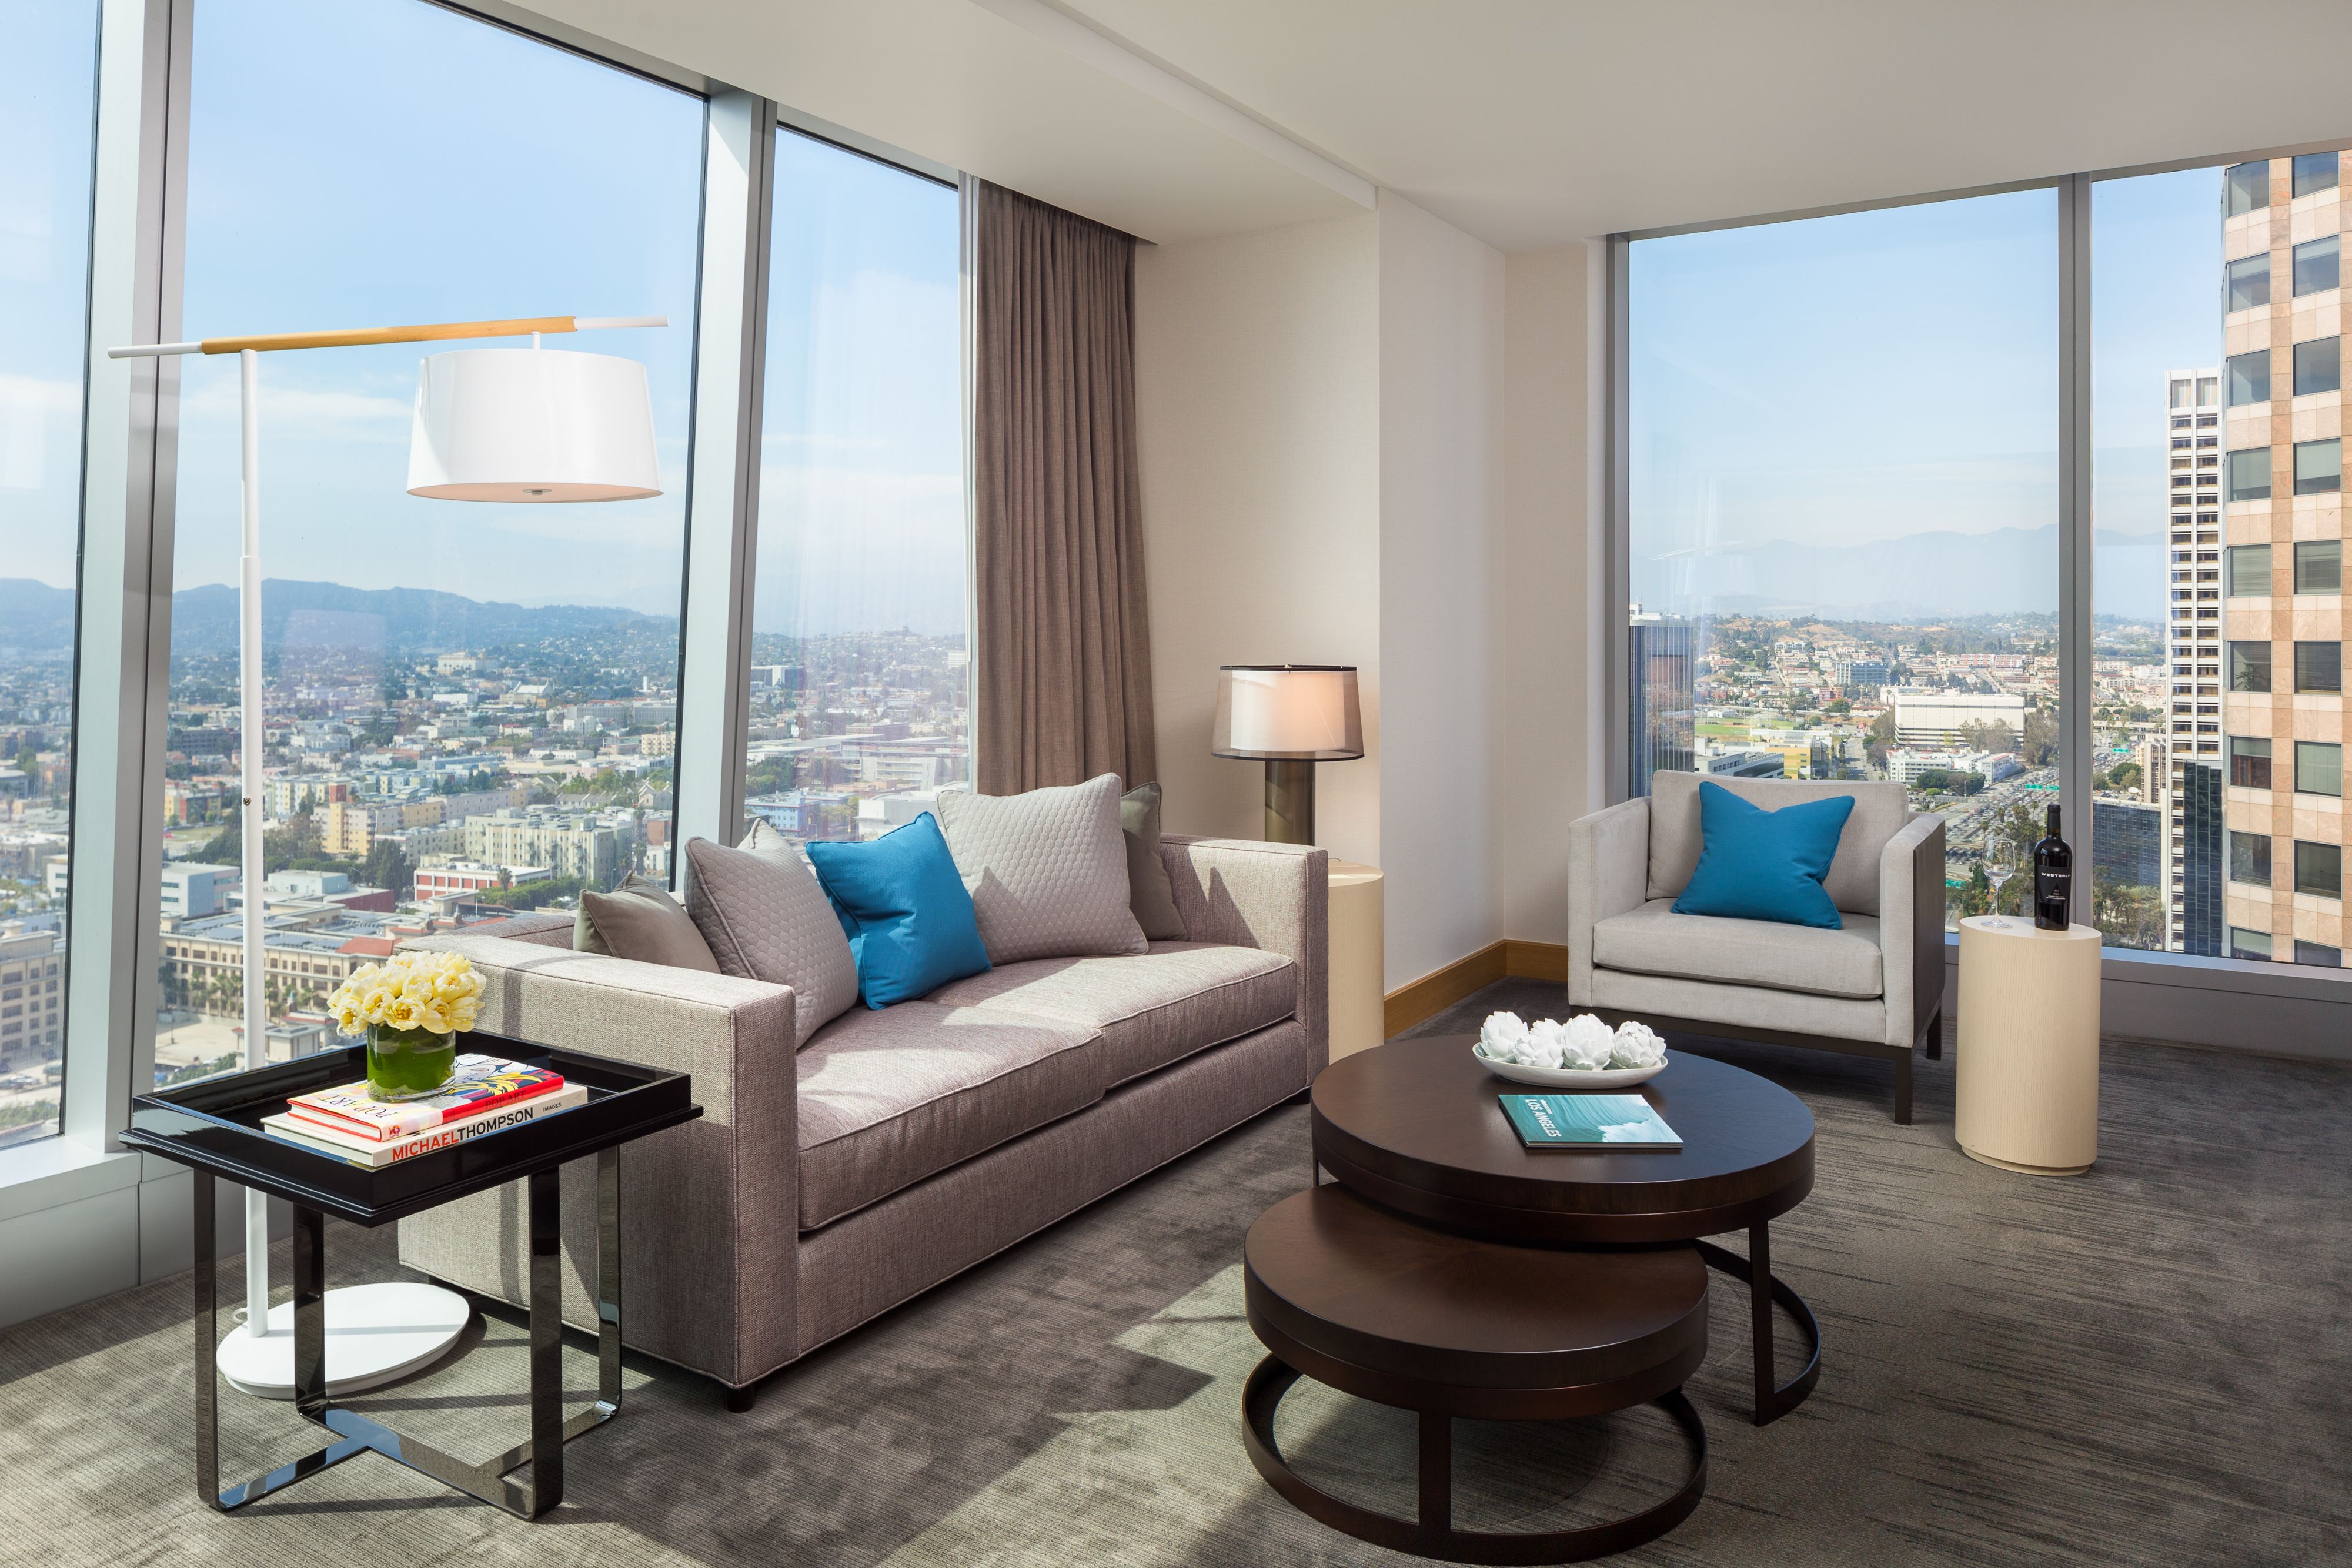 Pet Friendly InterContinental Los Angeles Downtown in Los Angeles, California